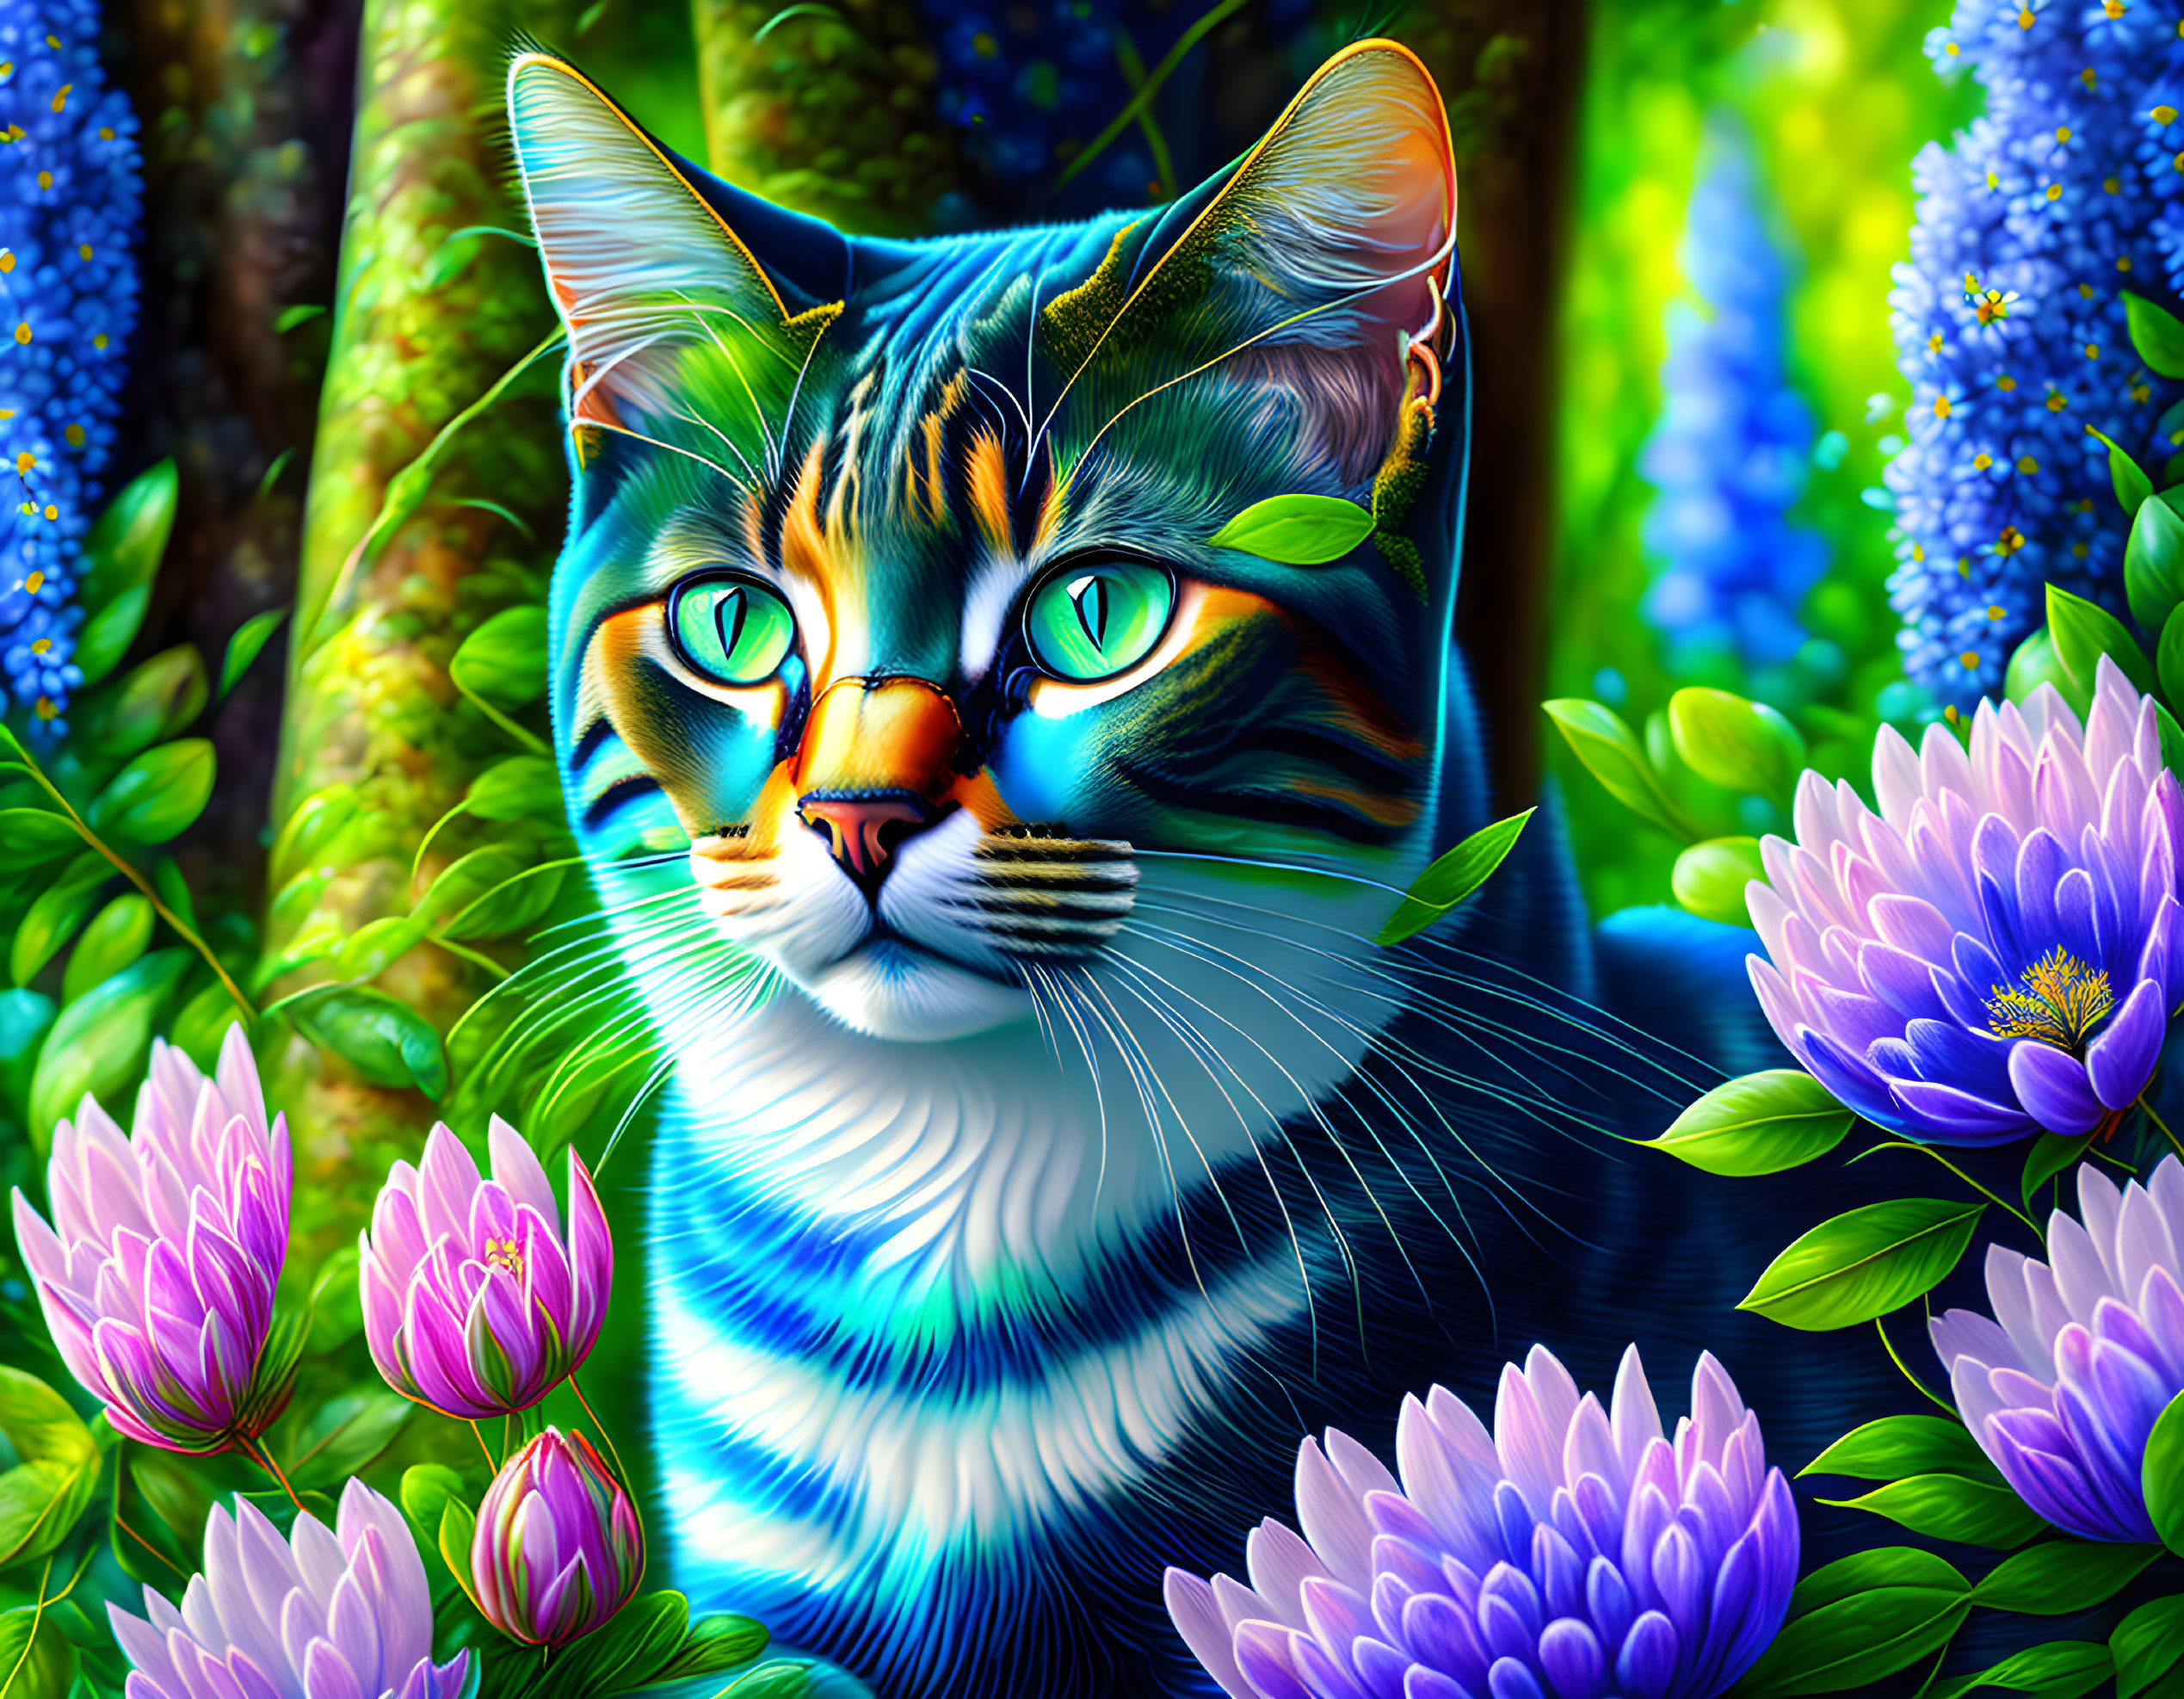 Vibrant cat with patterns among flowers and foliage